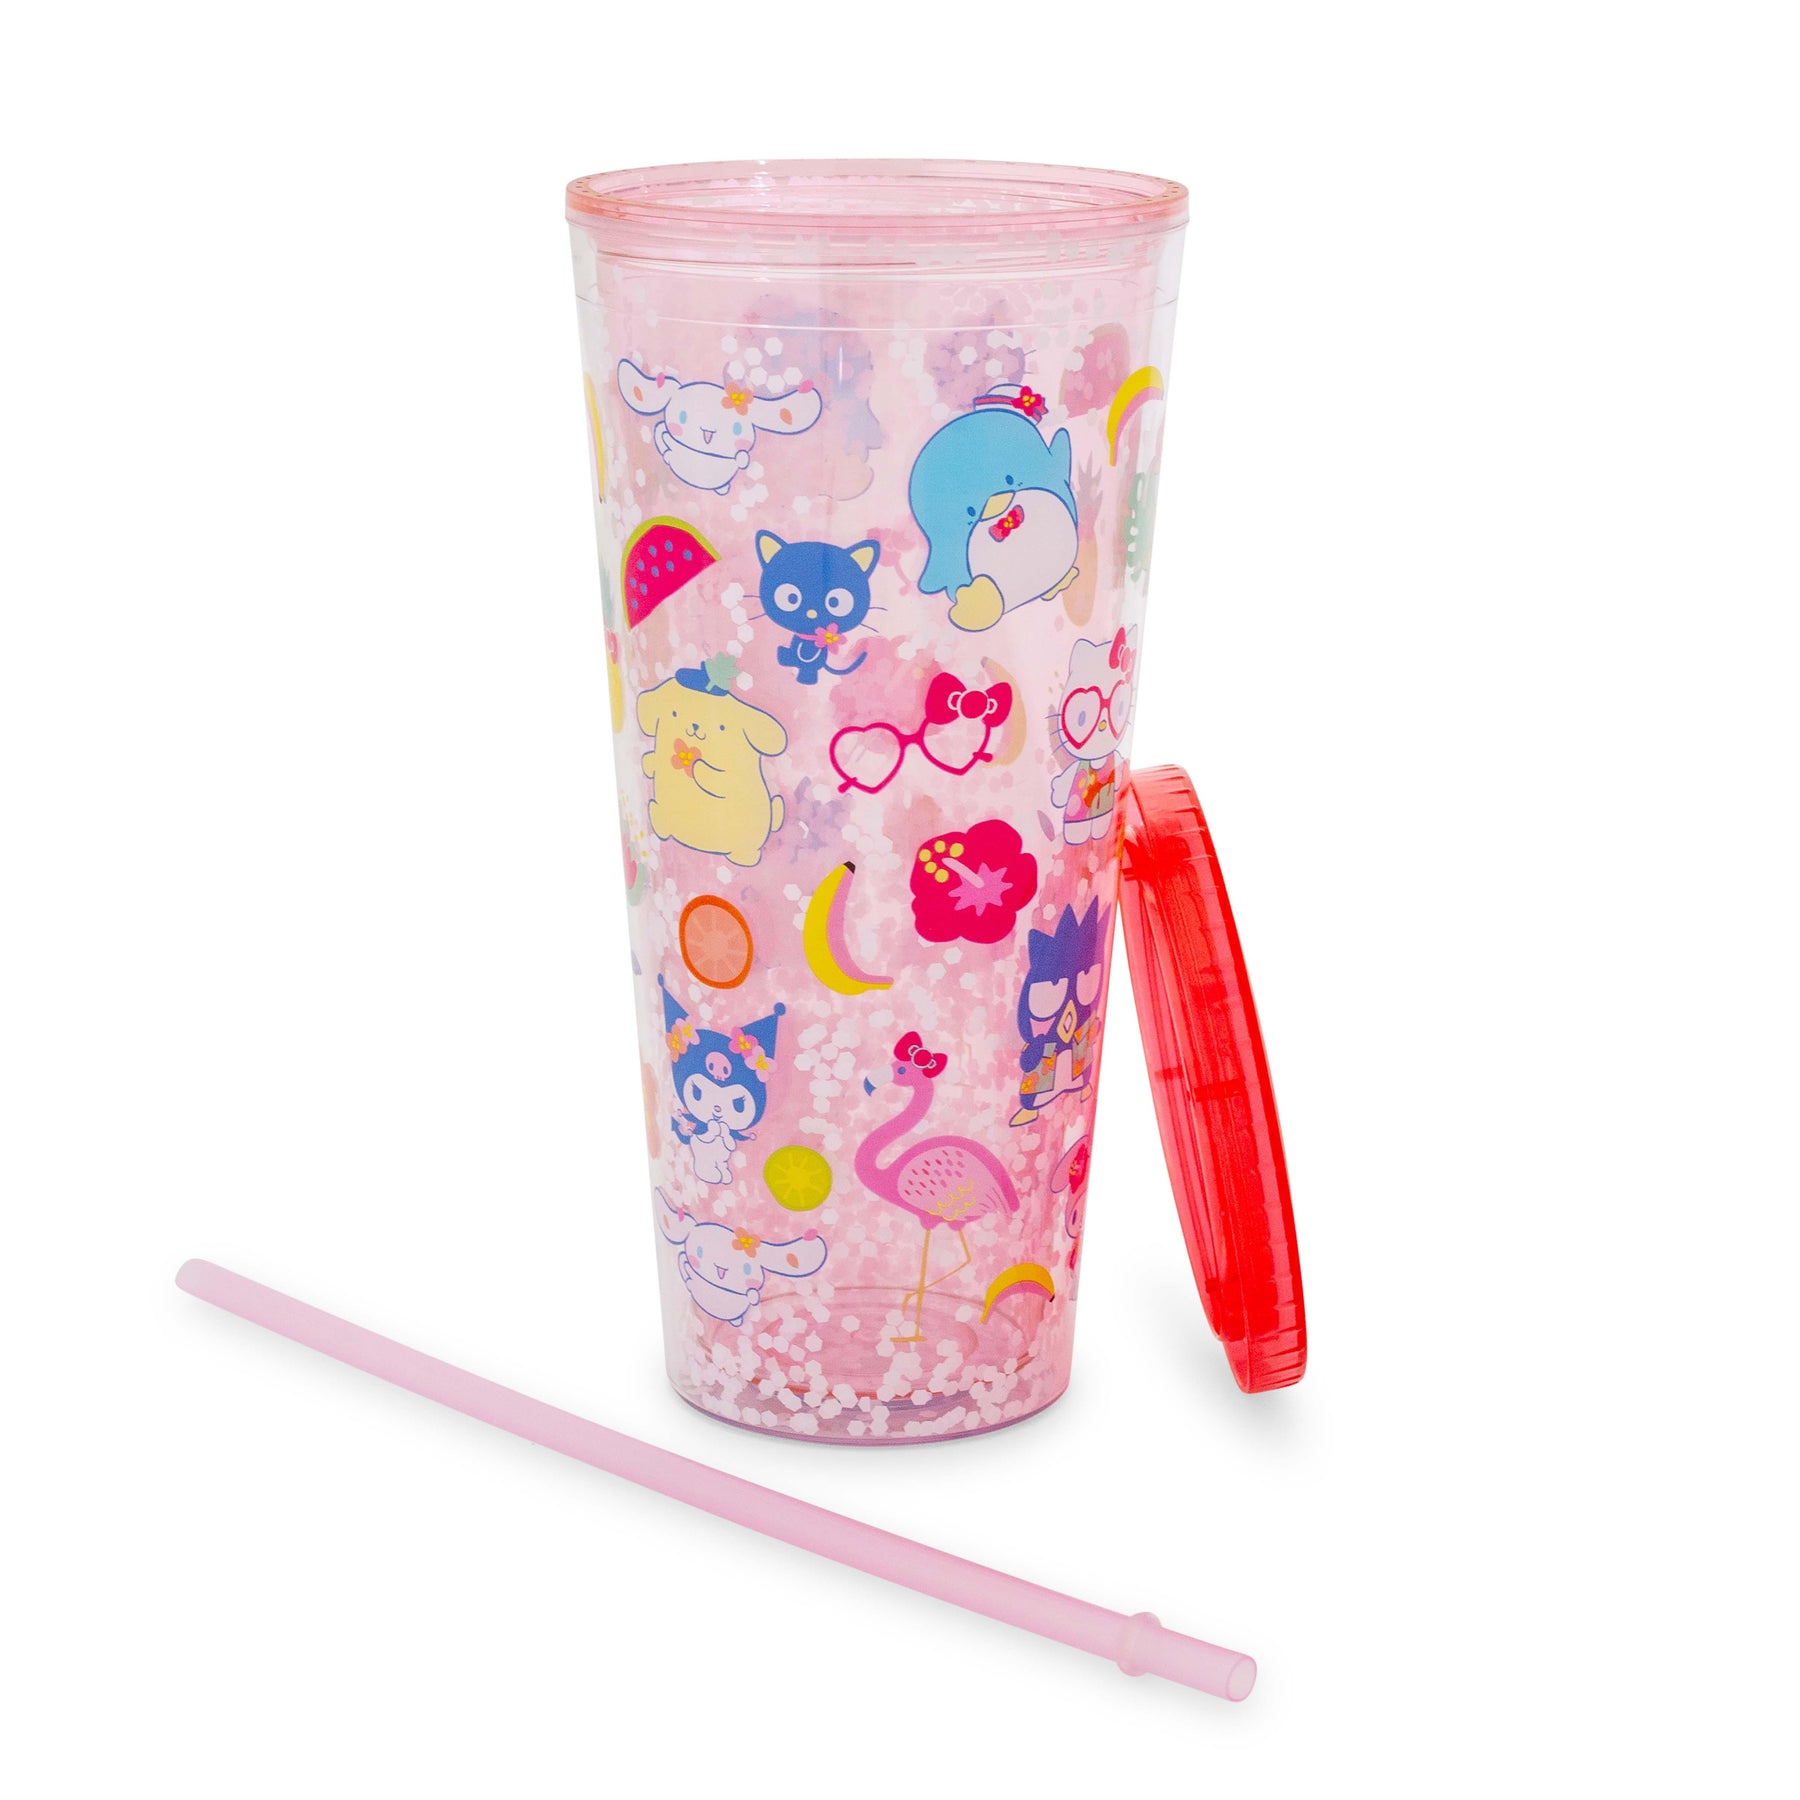 Sanrio Hello Kitty and Friends Icons Confetti Carnival Cup | Holds 32 Ounces